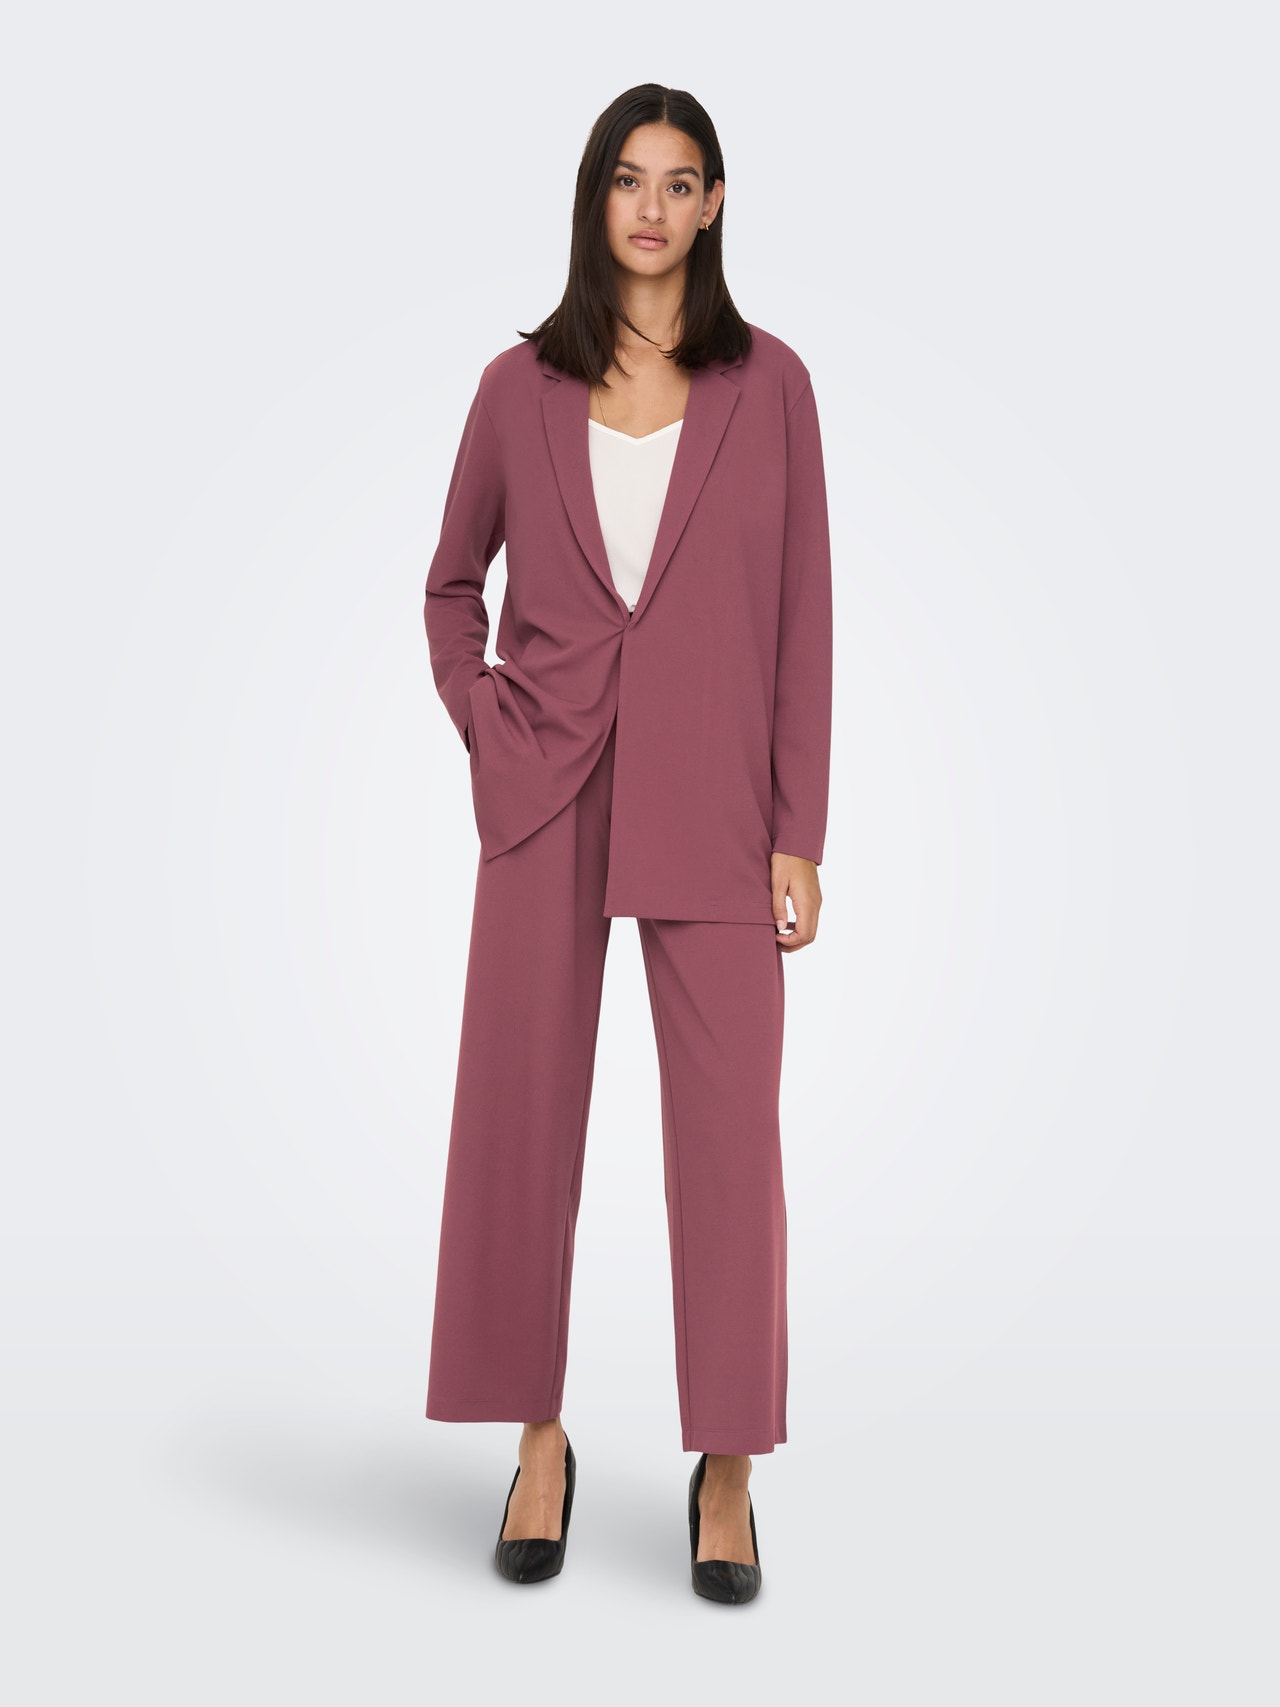 ONLY Long Blazer -Crushed Berry - 15180572